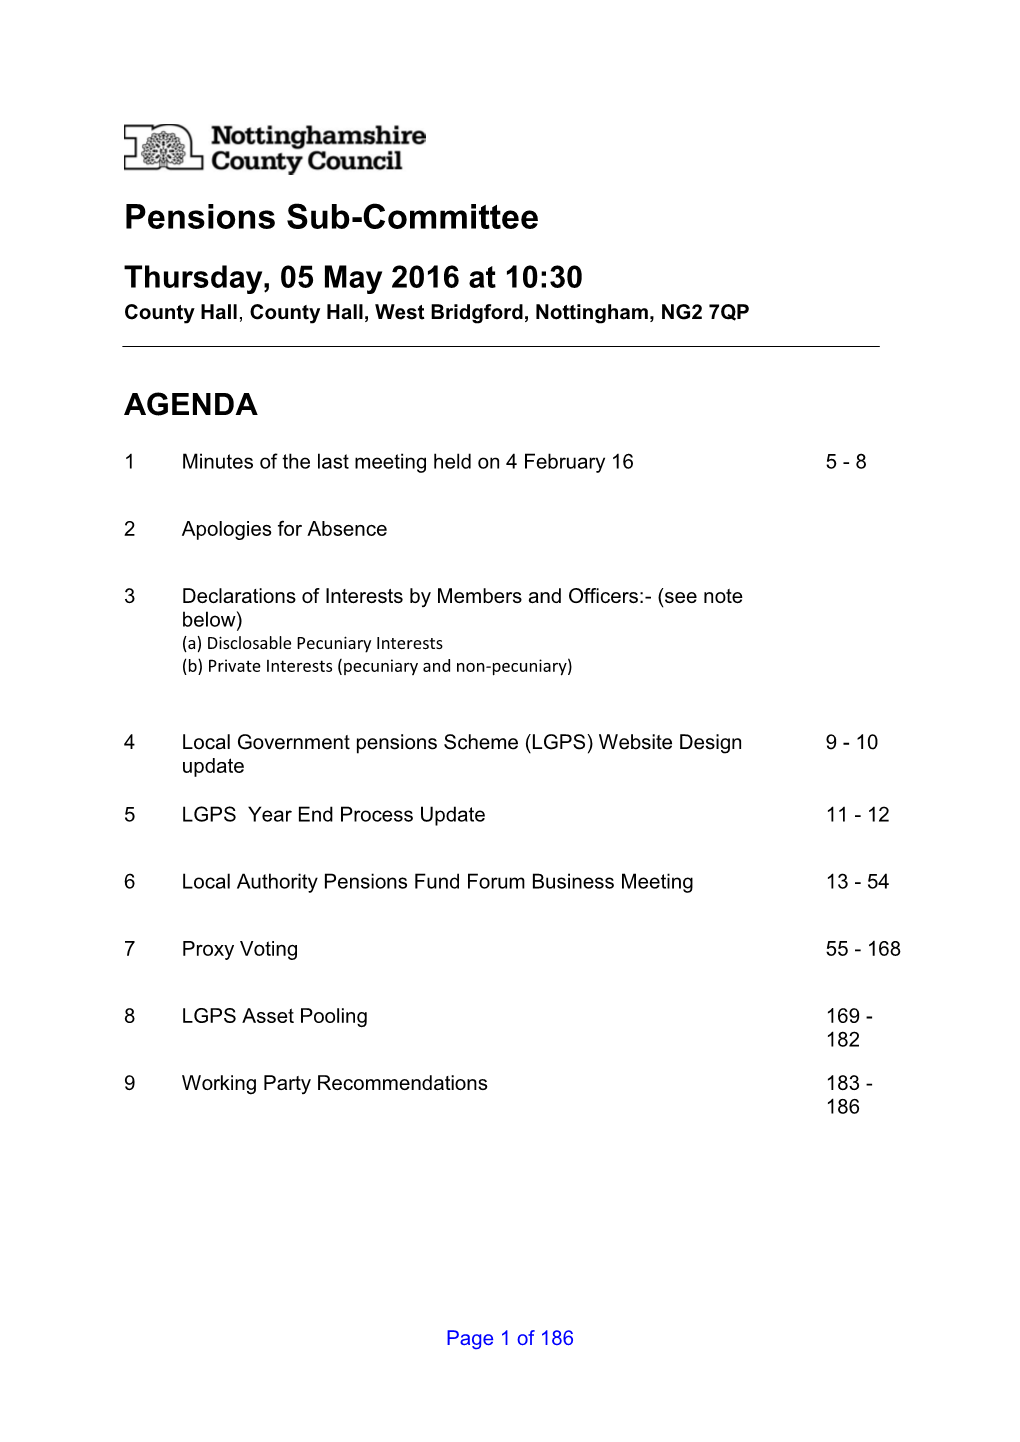 Pensions Sub-Committee Thursday, 05 May 2016 at 10:30 County Hall, County Hall, West Bridgford, Nottingham, NG2 7QP